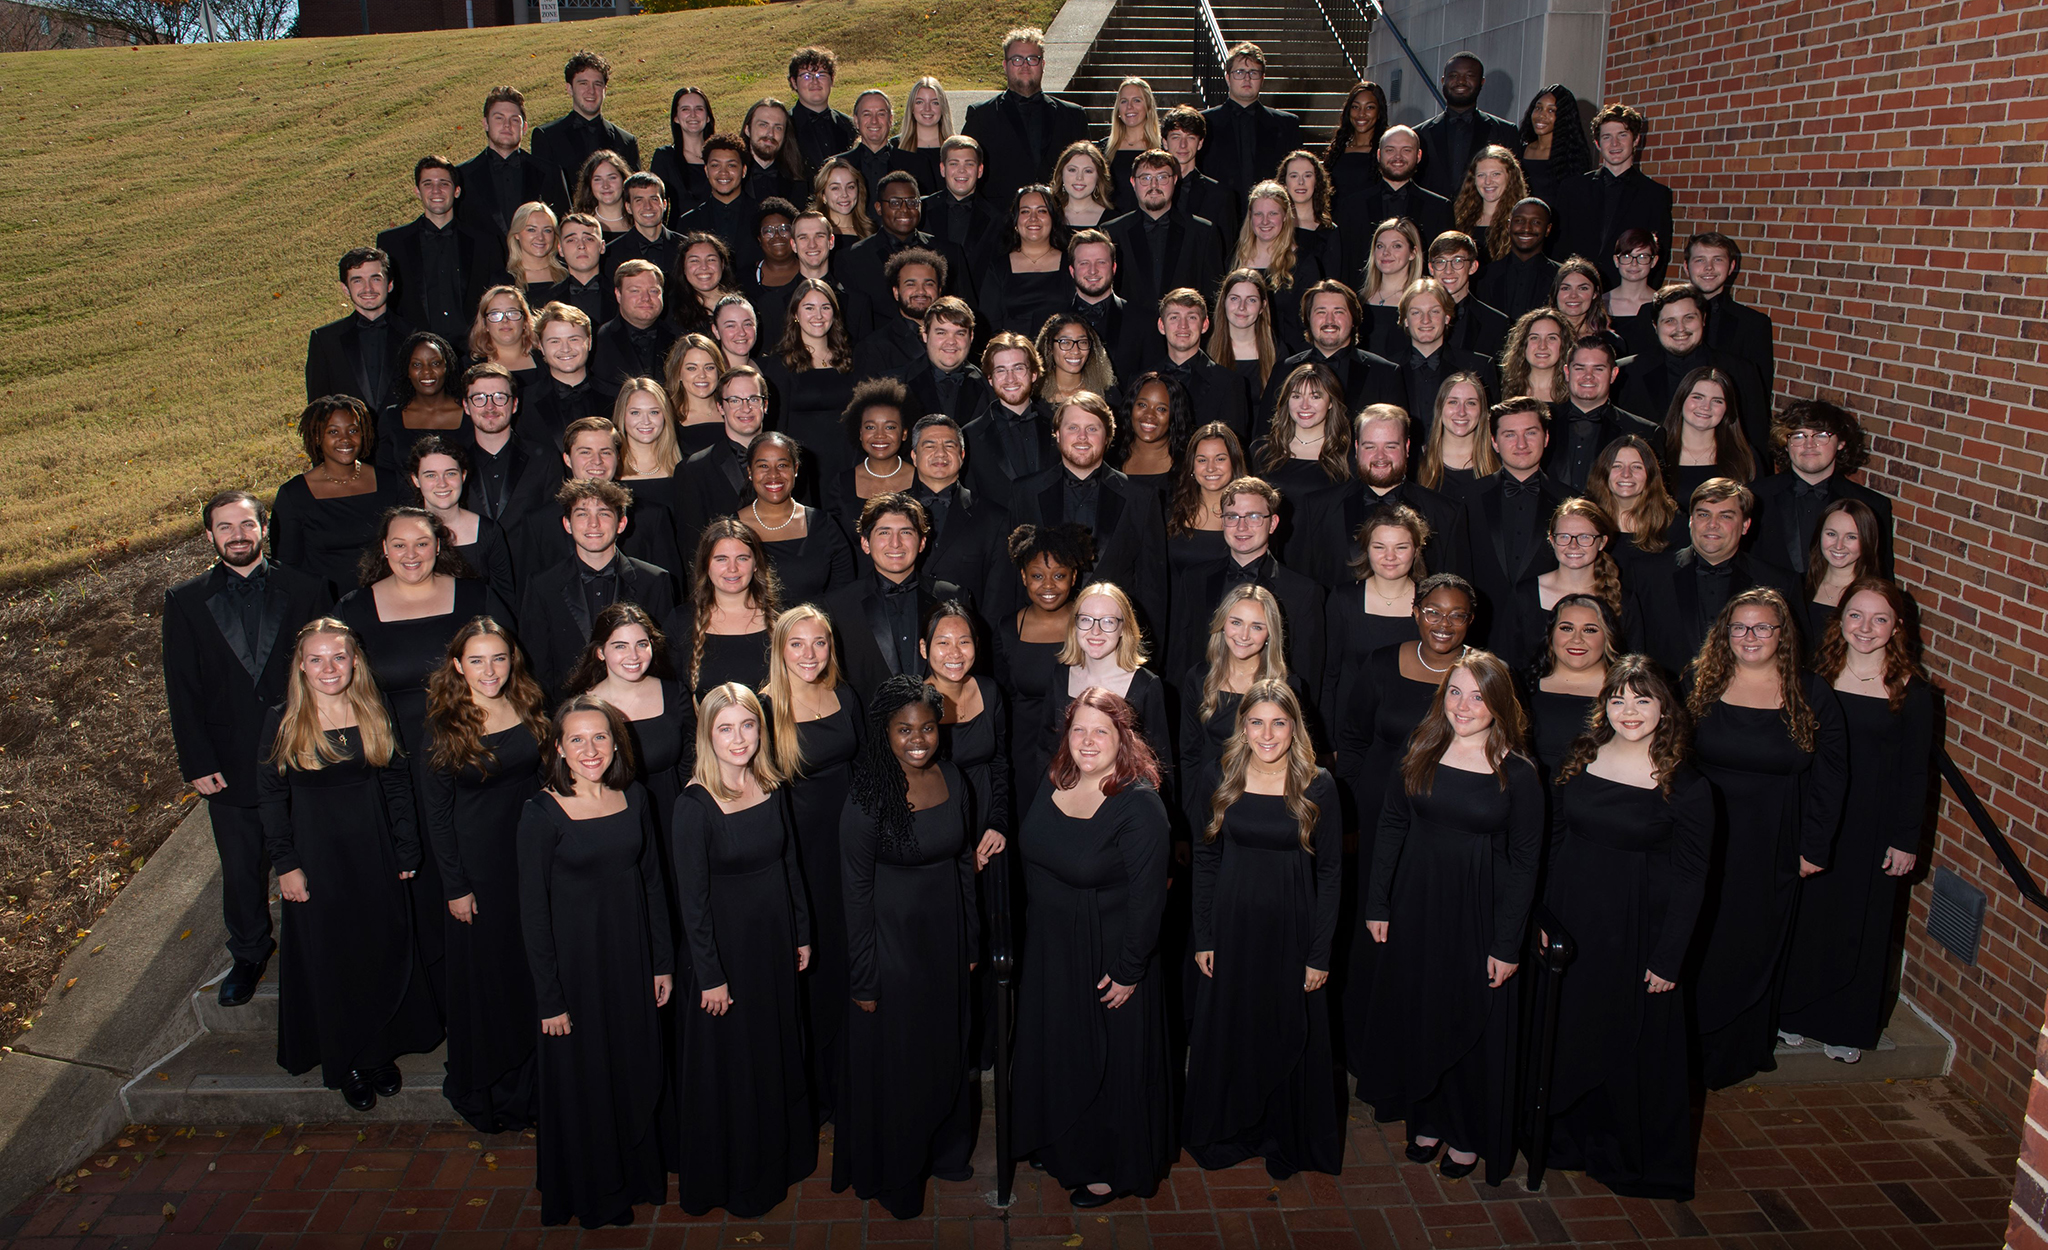 The university’s Concert Singers will perform ‘… and Justice for All’ at 7:30 p.m. May 3 in Nutt Auditorium. The performance is one of the university’s final events celebrating its 60th a